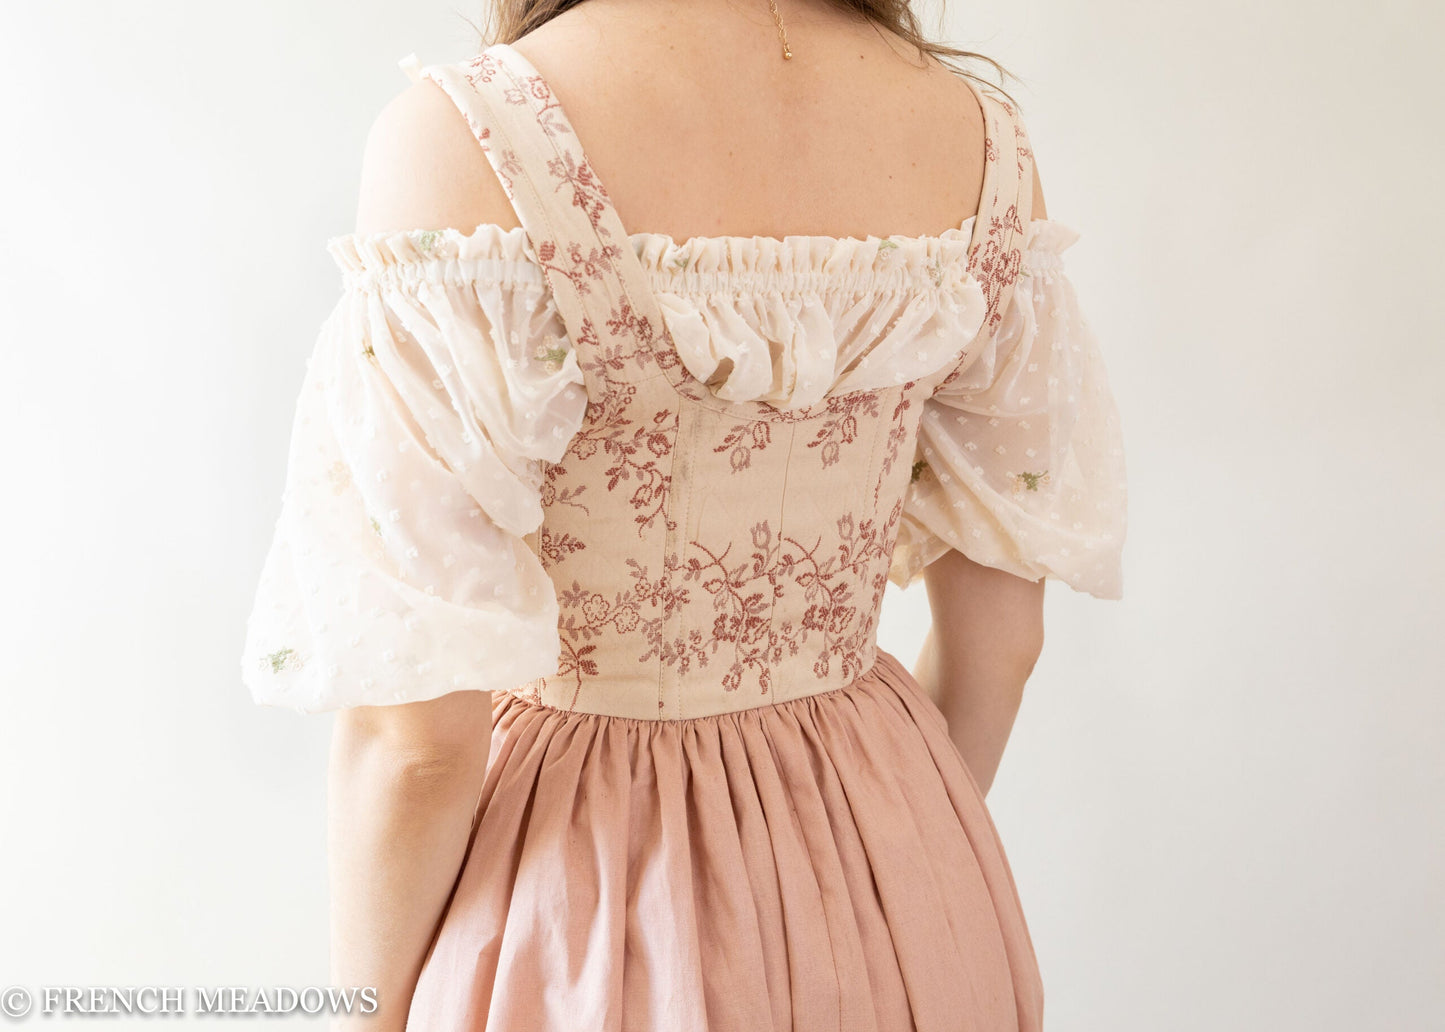 Load image into Gallery viewer, READY TO SHIP Rosey Ivory and Blush Renaissance Corset Dress
